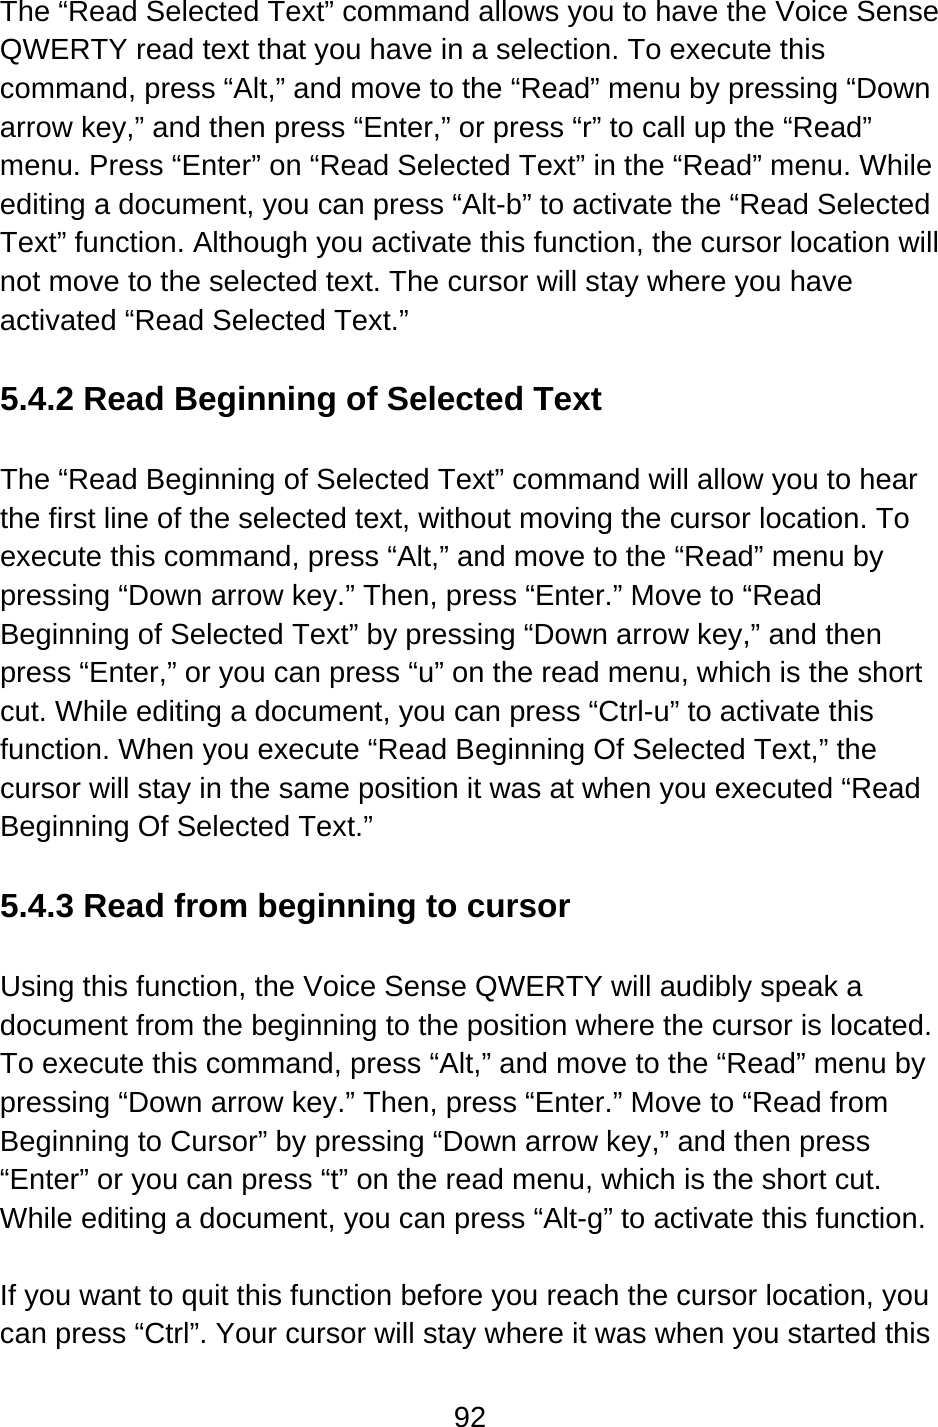 92  The “Read Selected Text” command allows you to have the Voice Sense QWERTY read text that you have in a selection. To execute this command, press “Alt,” and move to the “Read” menu by pressing “Down arrow key,” and then press “Enter,” or press “r” to call up the “Read” menu. Press “Enter” on “Read Selected Text” in the “Read” menu. While editing a document, you can press “Alt-b” to activate the “Read Selected Text” function. Although you activate this function, the cursor location will not move to the selected text. The cursor will stay where you have activated “Read Selected Text.”  5.4.2 Read Beginning of Selected Text  The “Read Beginning of Selected Text” command will allow you to hear the first line of the selected text, without moving the cursor location. To execute this command, press “Alt,” and move to the “Read” menu by pressing “Down arrow key.” Then, press “Enter.” Move to “Read Beginning of Selected Text” by pressing “Down arrow key,” and then press “Enter,” or you can press “u” on the read menu, which is the short cut. While editing a document, you can press “Ctrl-u” to activate this function. When you execute “Read Beginning Of Selected Text,” the cursor will stay in the same position it was at when you executed “Read Beginning Of Selected Text.”  5.4.3 Read from beginning to cursor  Using this function, the Voice Sense QWERTY will audibly speak a document from the beginning to the position where the cursor is located.   To execute this command, press “Alt,” and move to the “Read” menu by pressing “Down arrow key.” Then, press “Enter.” Move to “Read from Beginning to Cursor” by pressing “Down arrow key,” and then press “Enter” or you can press “t” on the read menu, which is the short cut.   While editing a document, you can press “Alt-g” to activate this function.  If you want to quit this function before you reach the cursor location, you can press “Ctrl”. Your cursor will stay where it was when you started this 